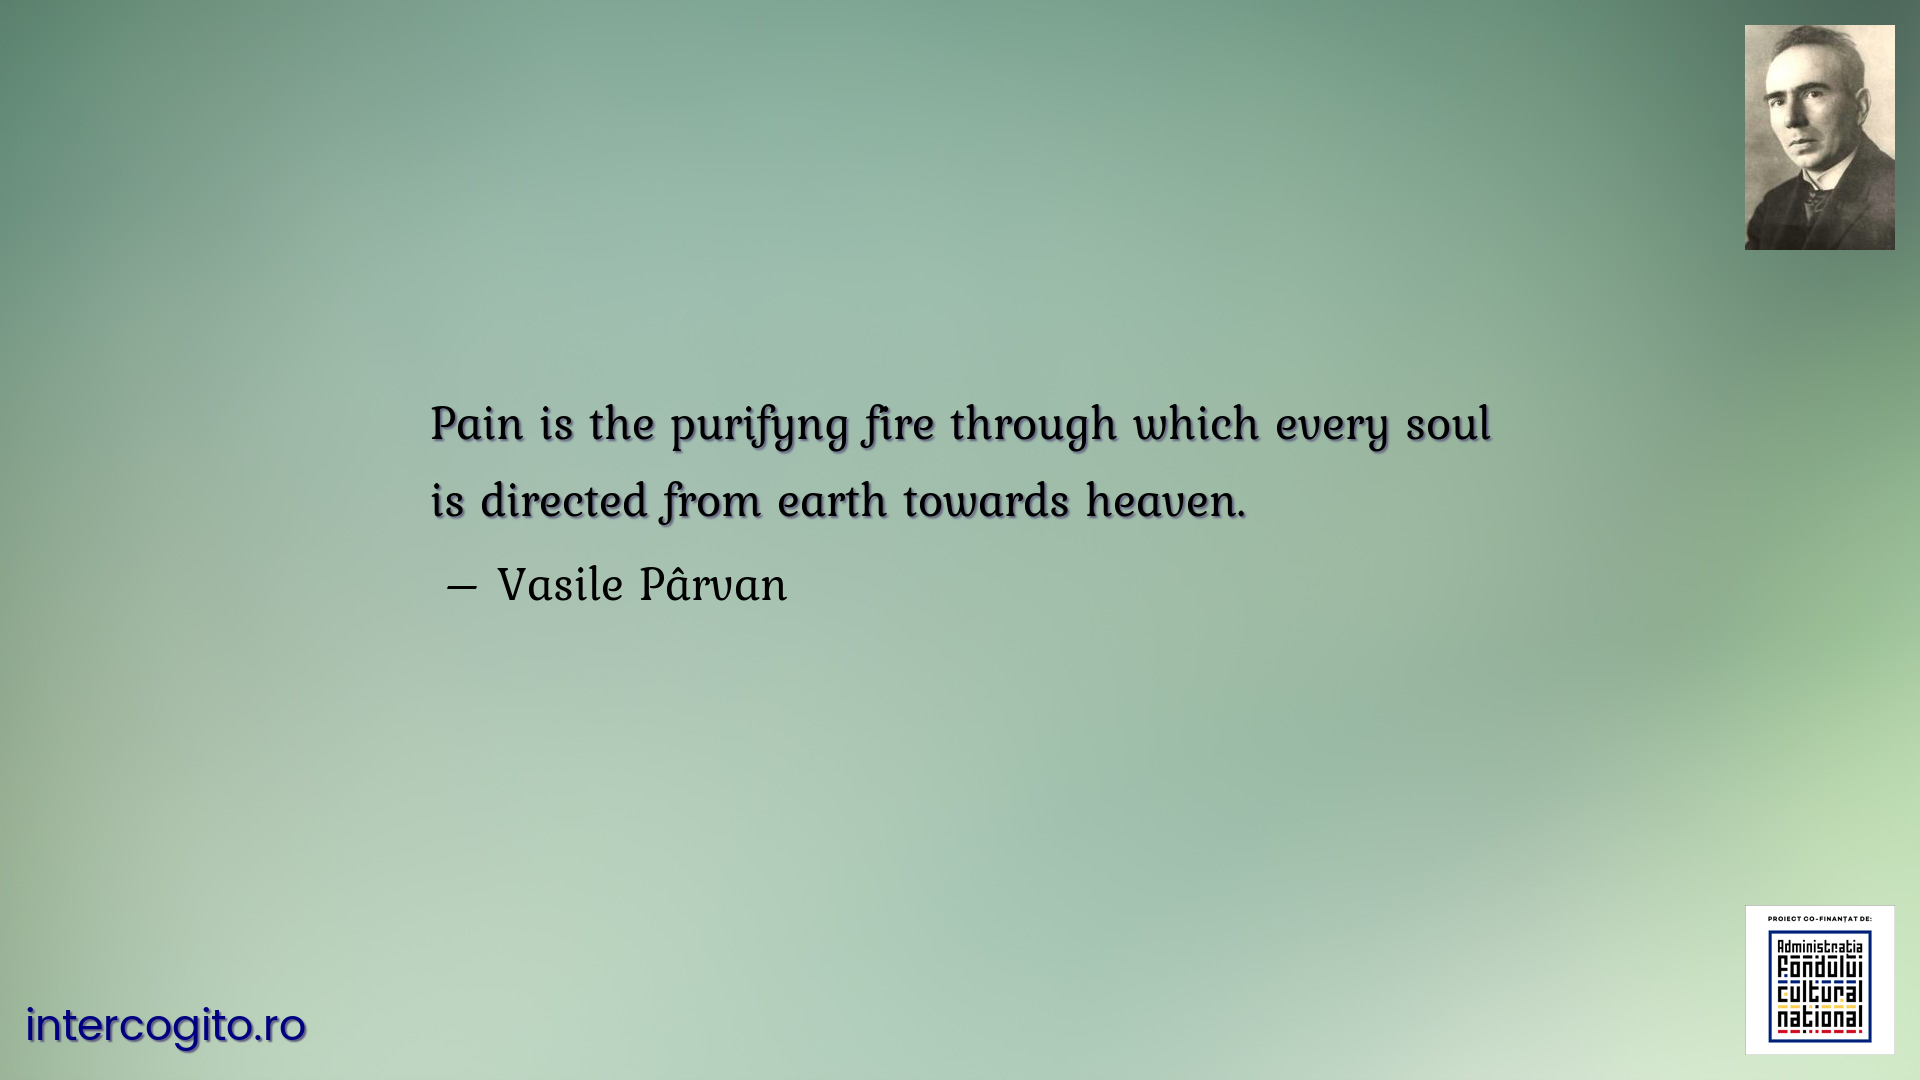 Pain is the purifyng fire through which every soul is directed from earth towards heaven.